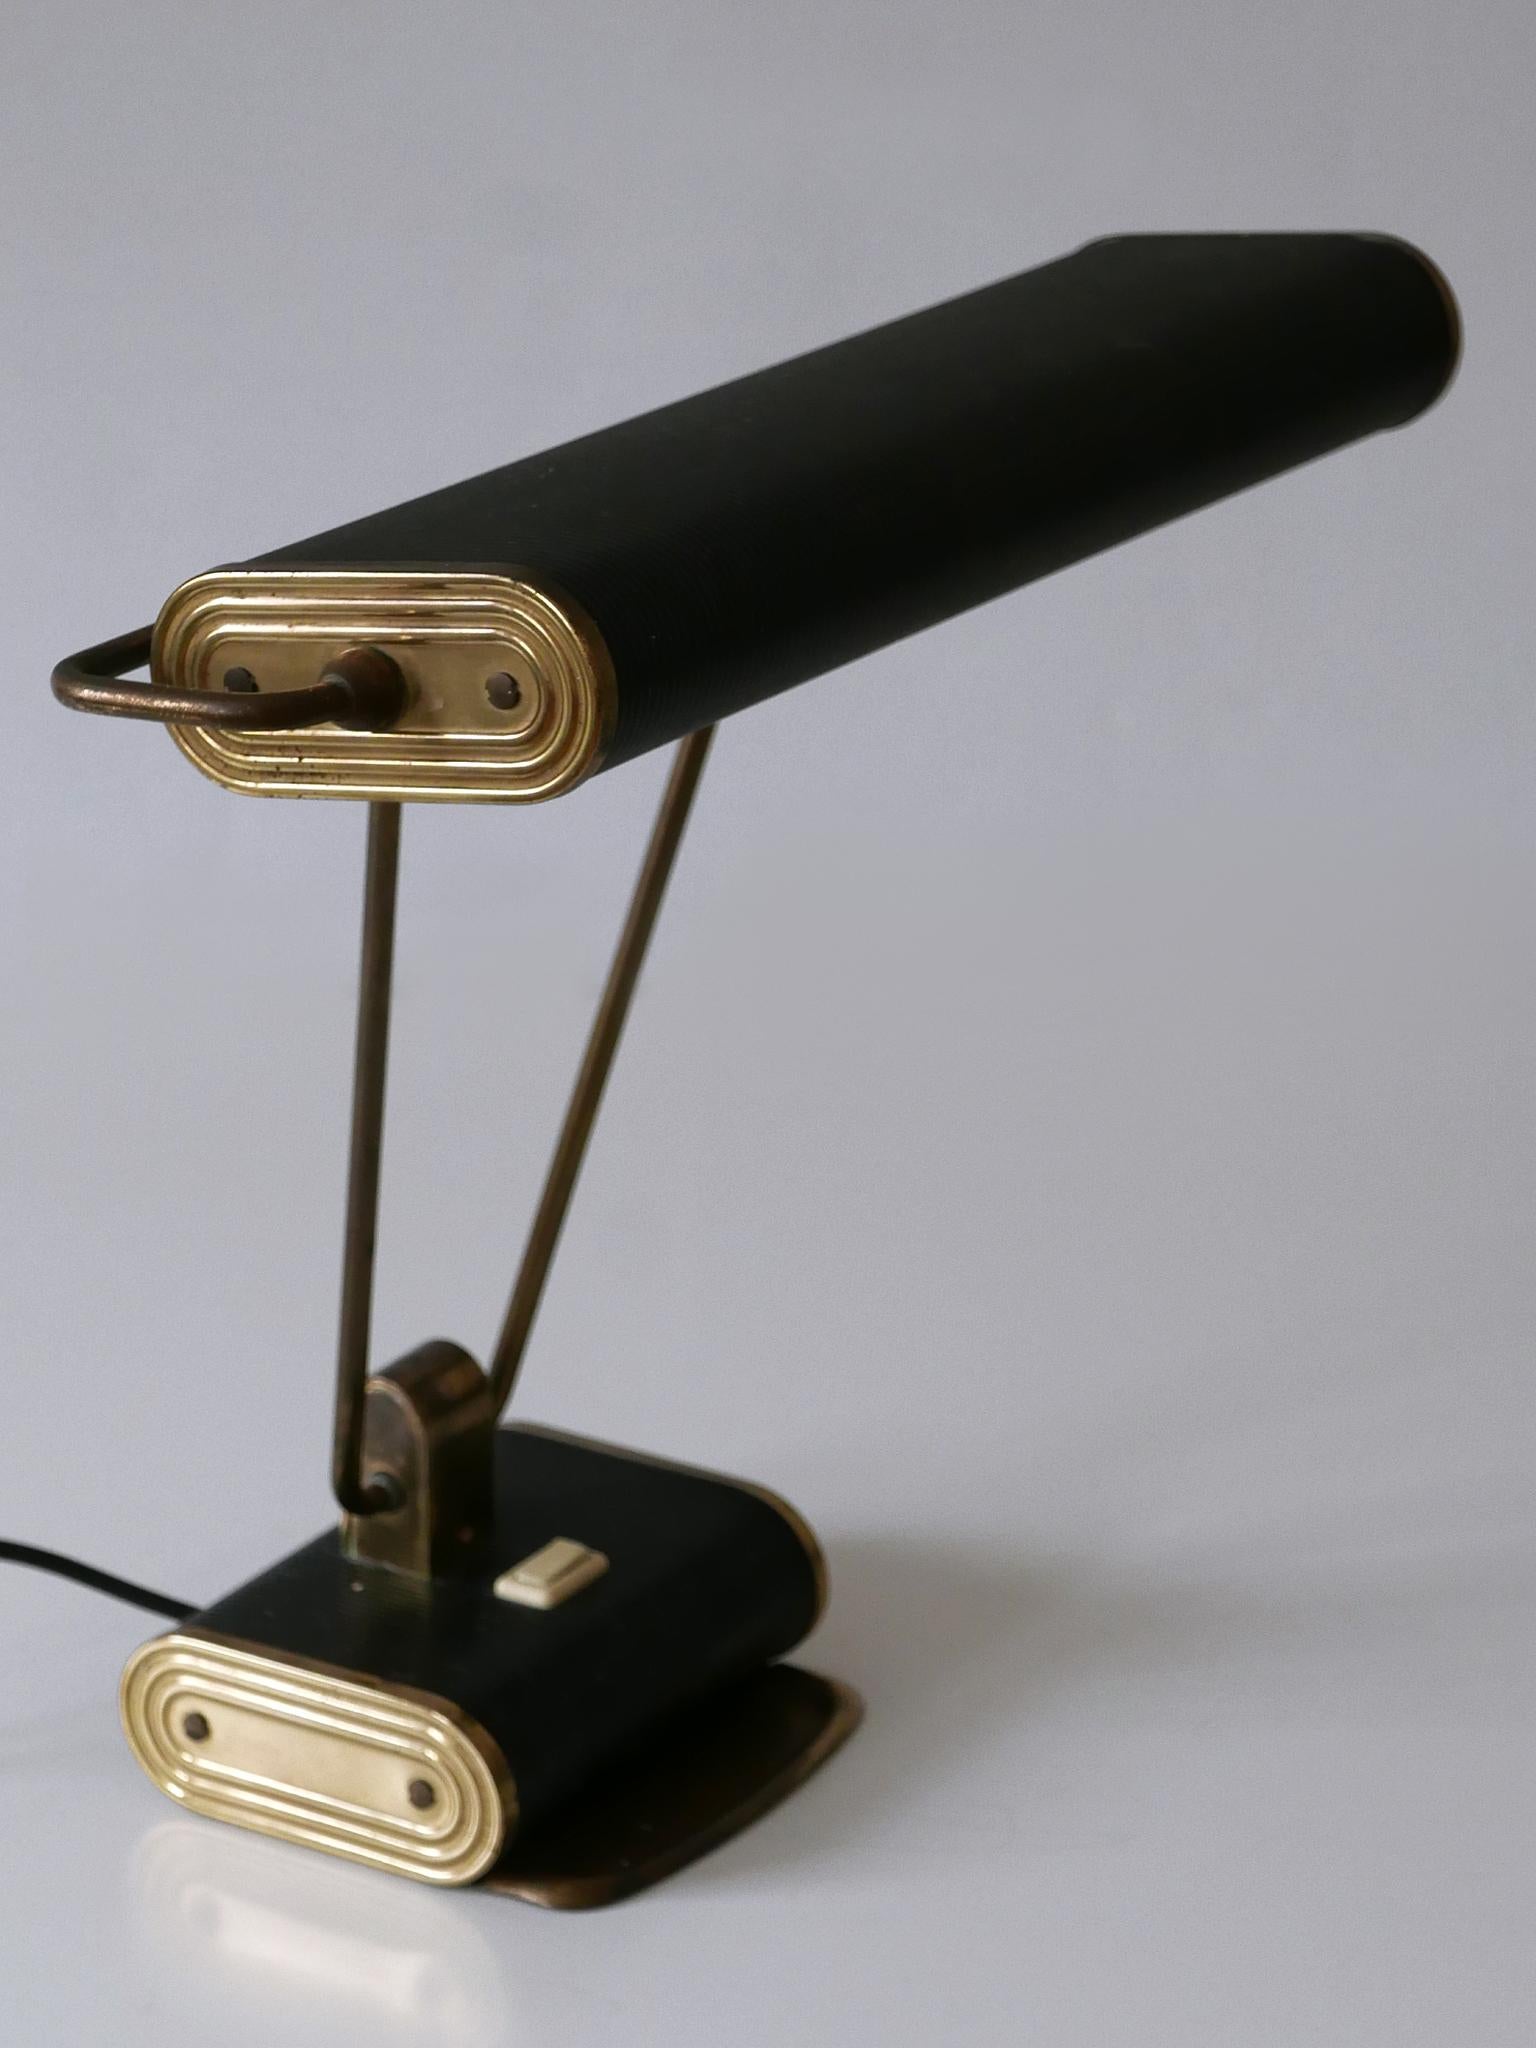 Art Deco Table Lamp or Desk Light 'No 71' by André Mounique for Jumo 1930s For Sale 5